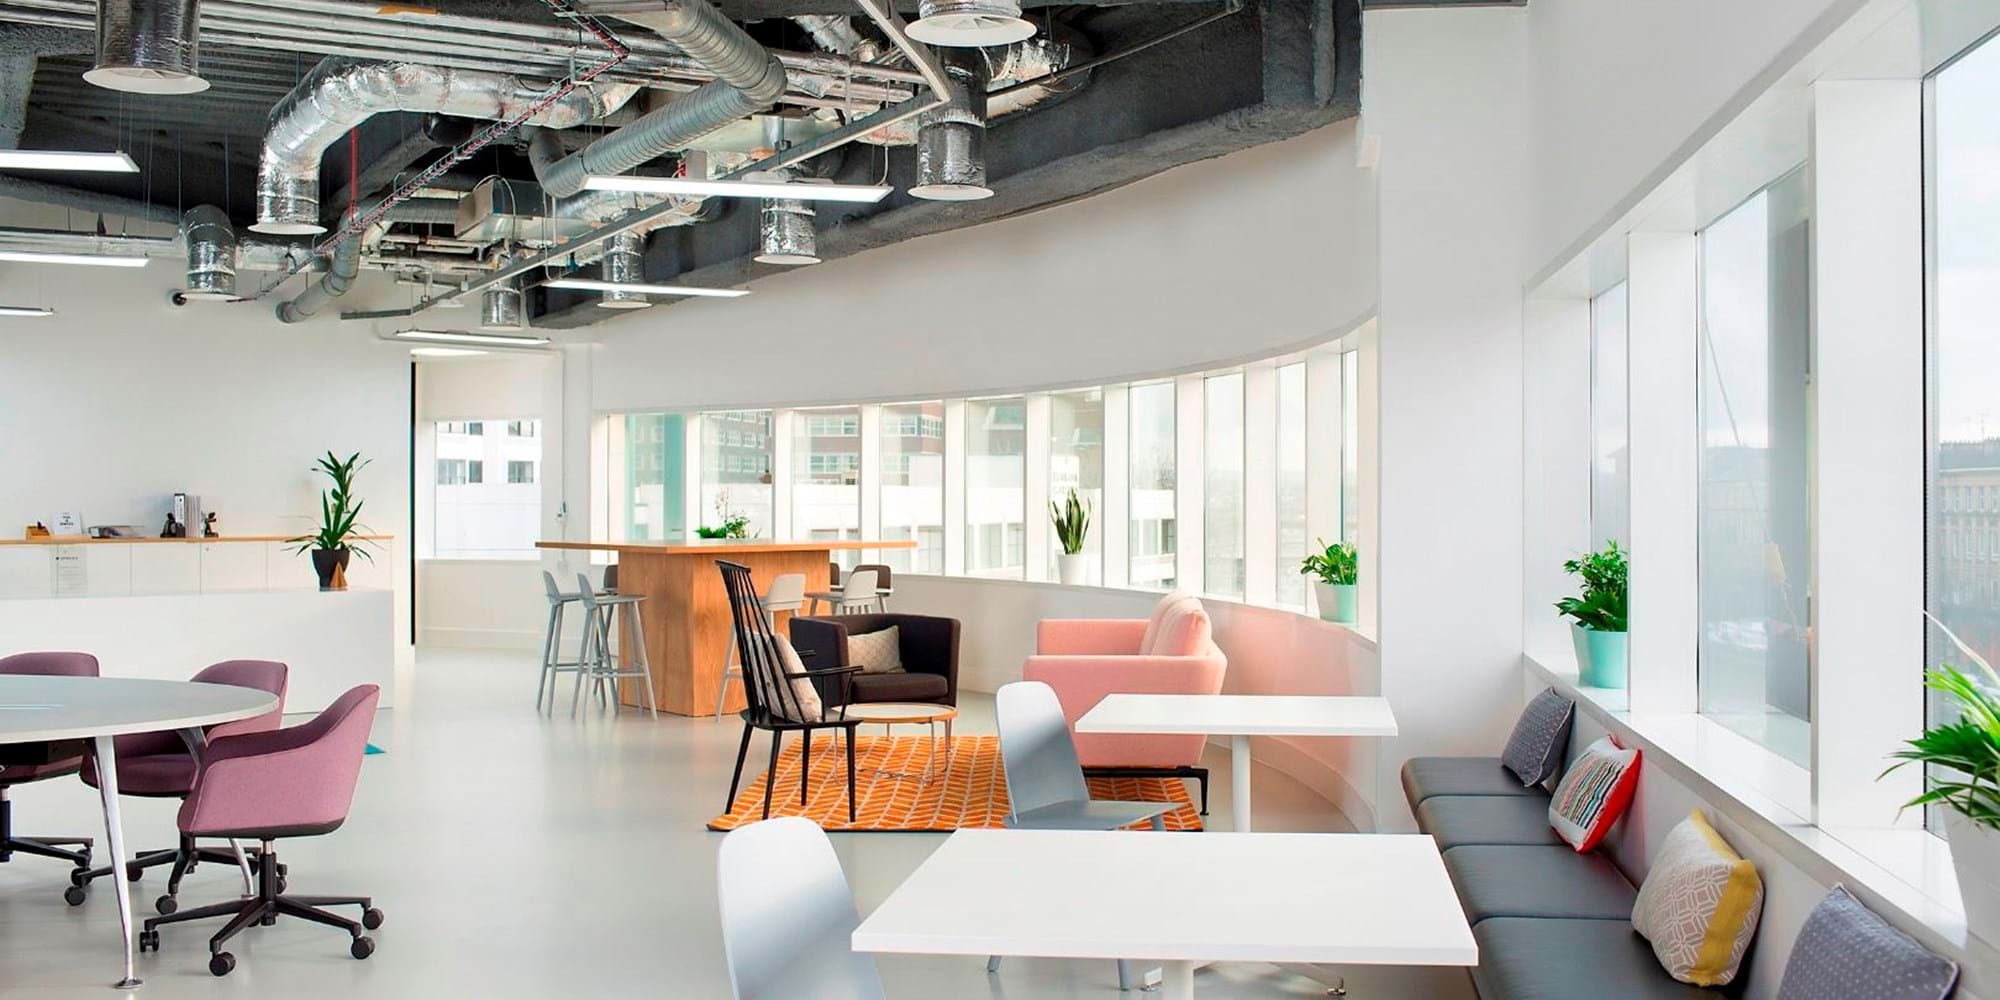 Modus Workspace office design, fit out and refurbishment - Spaces - Glasgow - TAY HOUSE 002.jpg